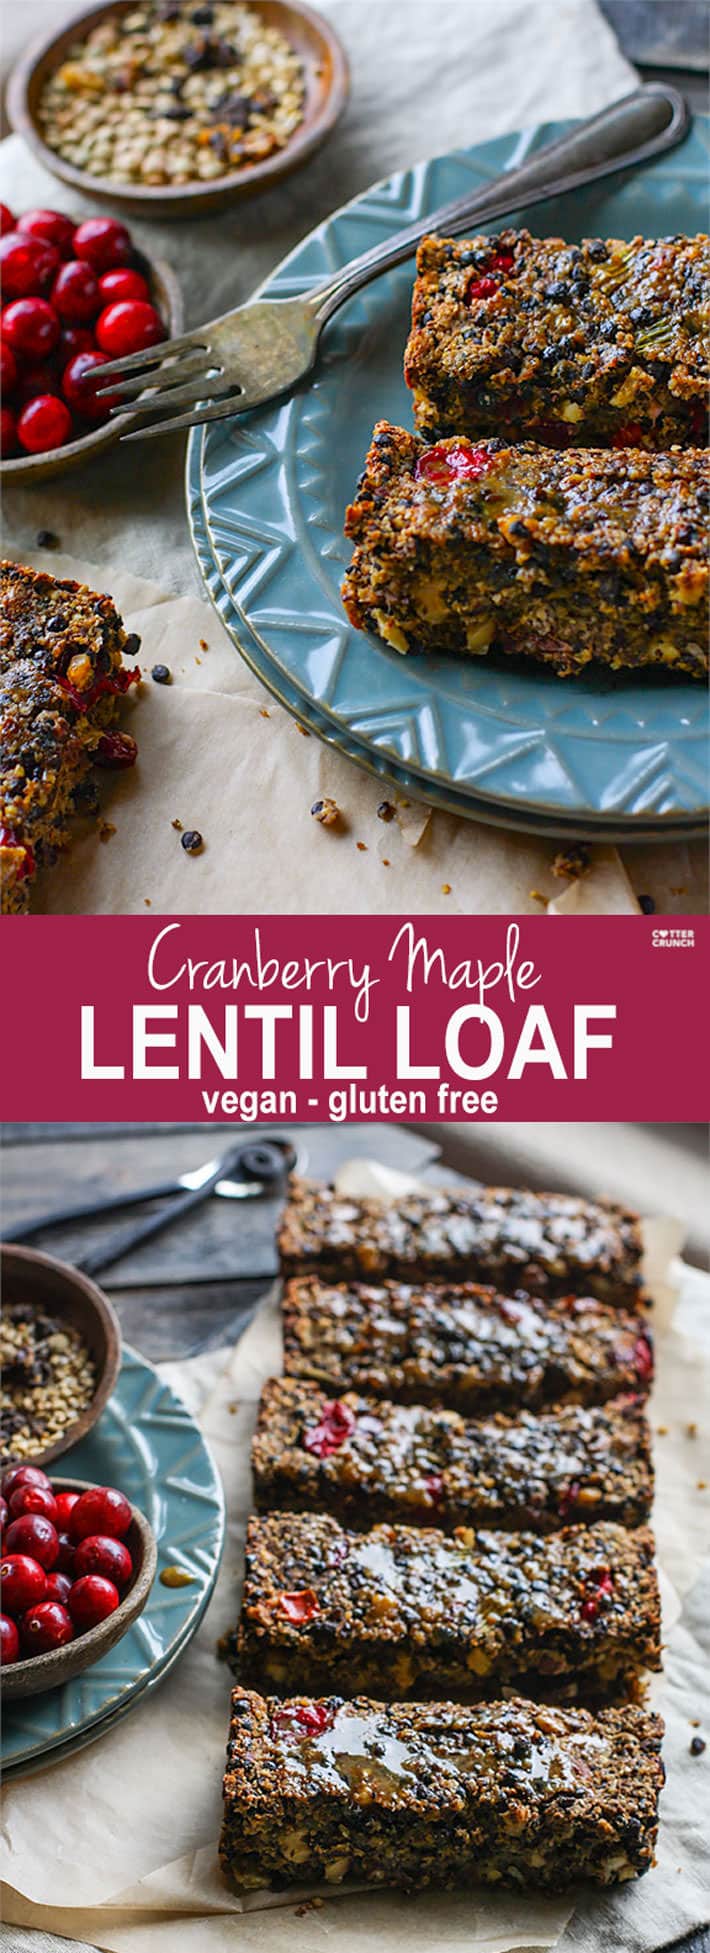 Gluten free Vegan Cranberry Maple Lentil loaf! A great dish to add to your Holiday table. Lentils, fresh cranberries, nuts, and sautéed veggies all baked up into one healthy and delicious lentil loaf. The Maple glaze topping makes it even more flavorful. Super easy to make as a side dish or a main dish.